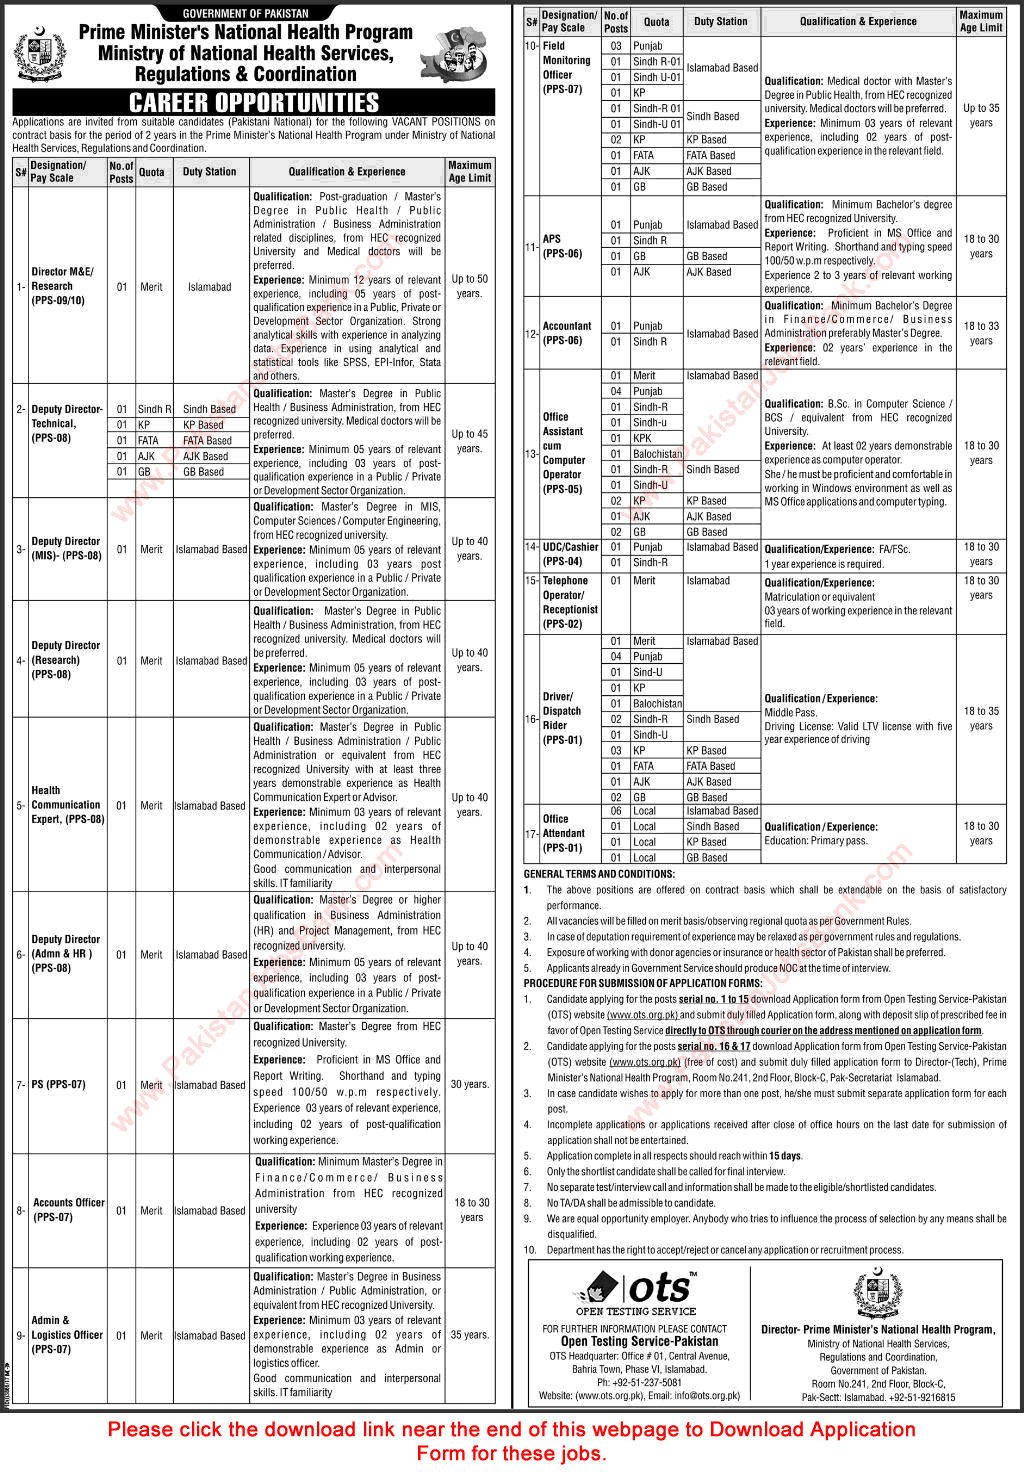 Ministry of National Health Services Jobs 2018 OTS Application Form Office Assistants, Drivers & Others Latest